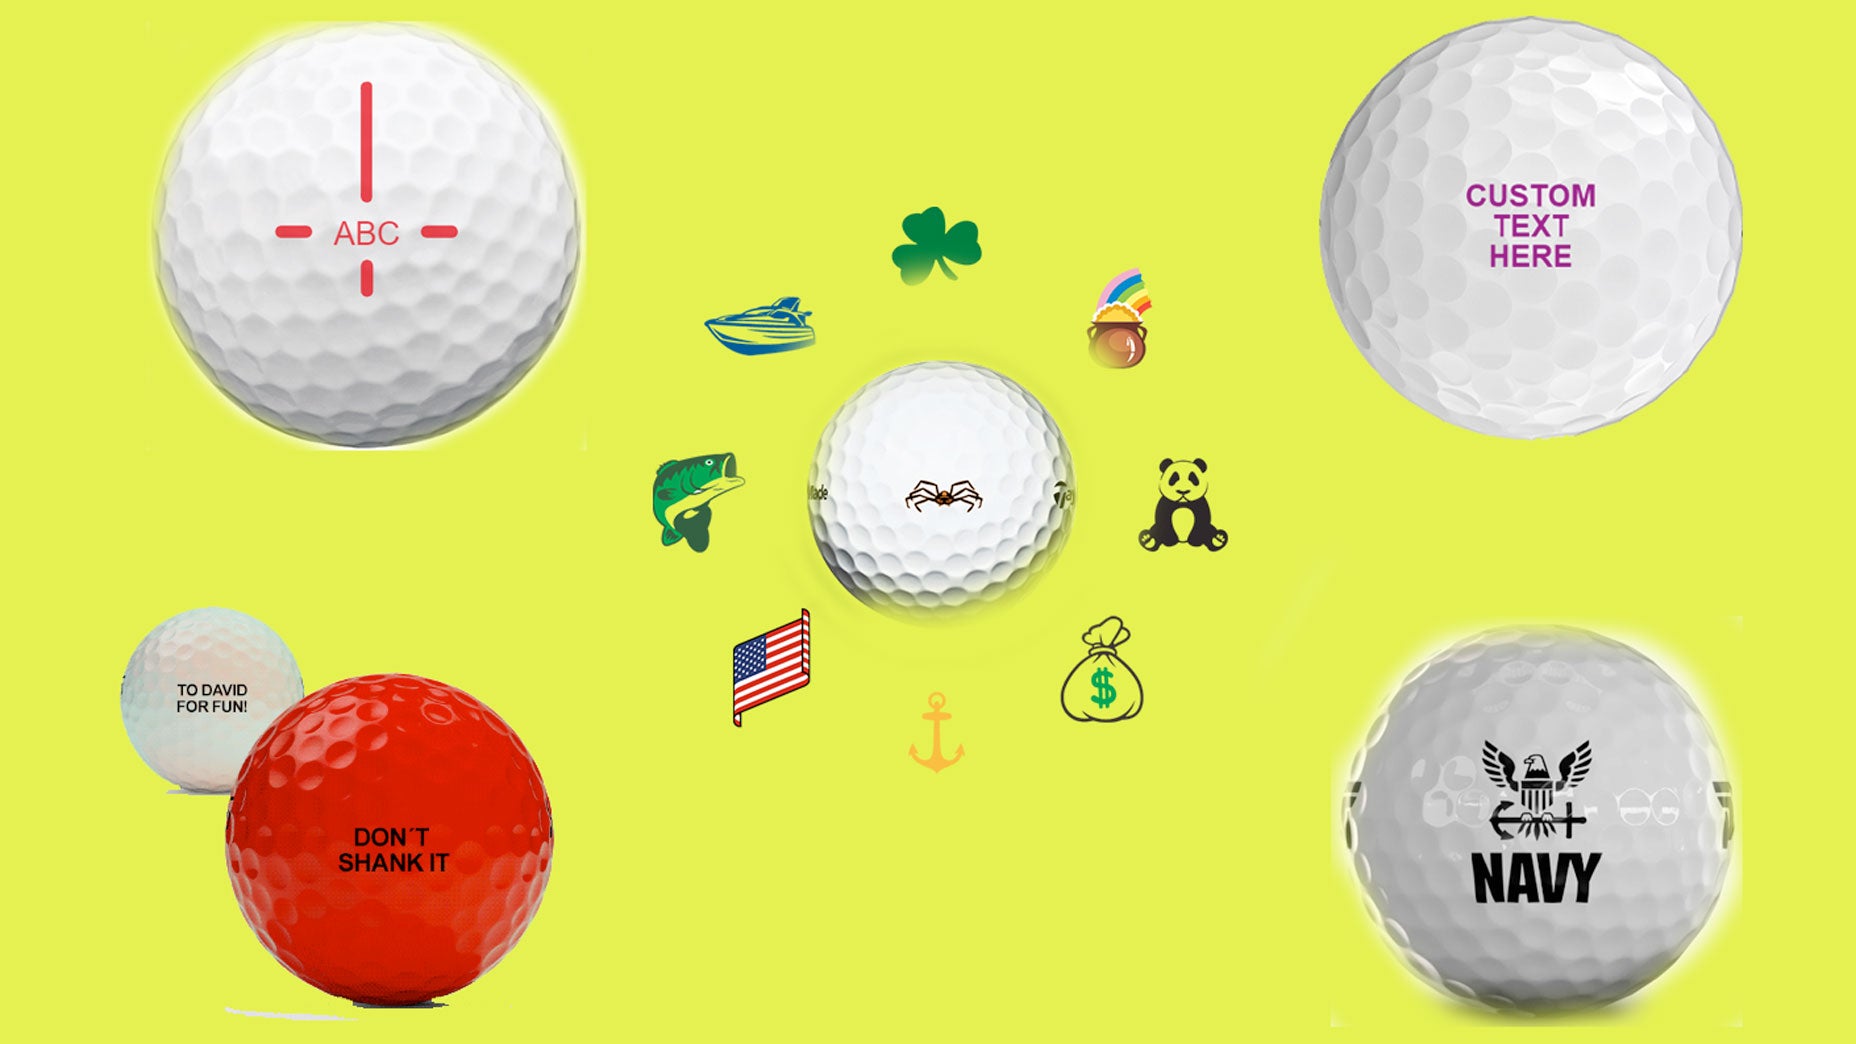 Five custom golf balls from various brands on yellow background